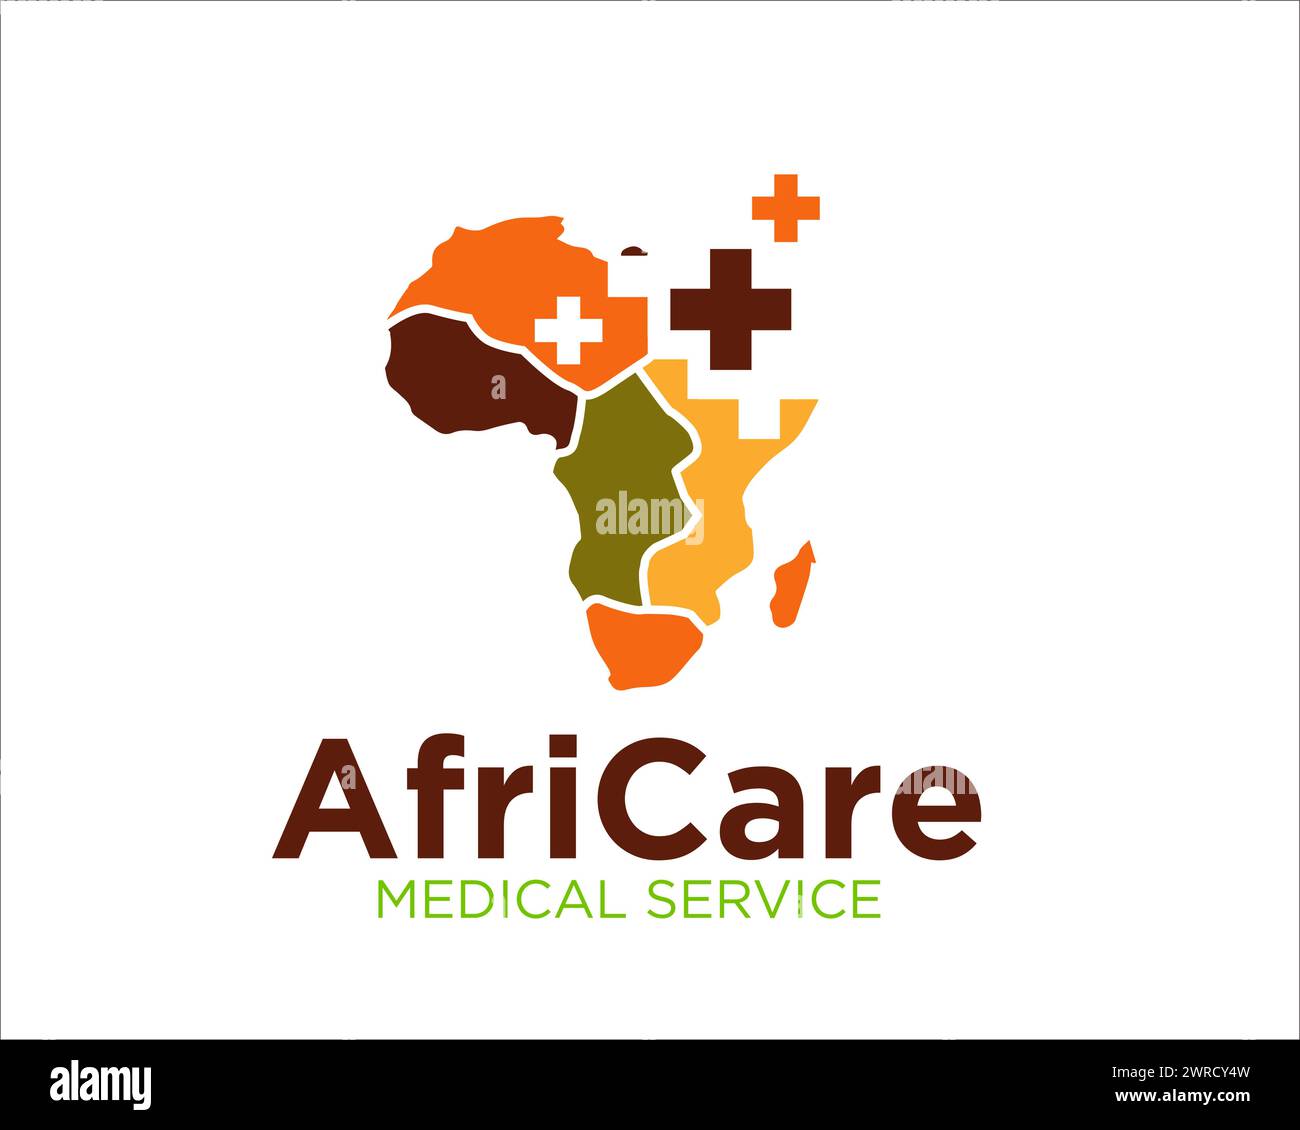 africa care logo designs for medical service and africa health consult Stock Vector